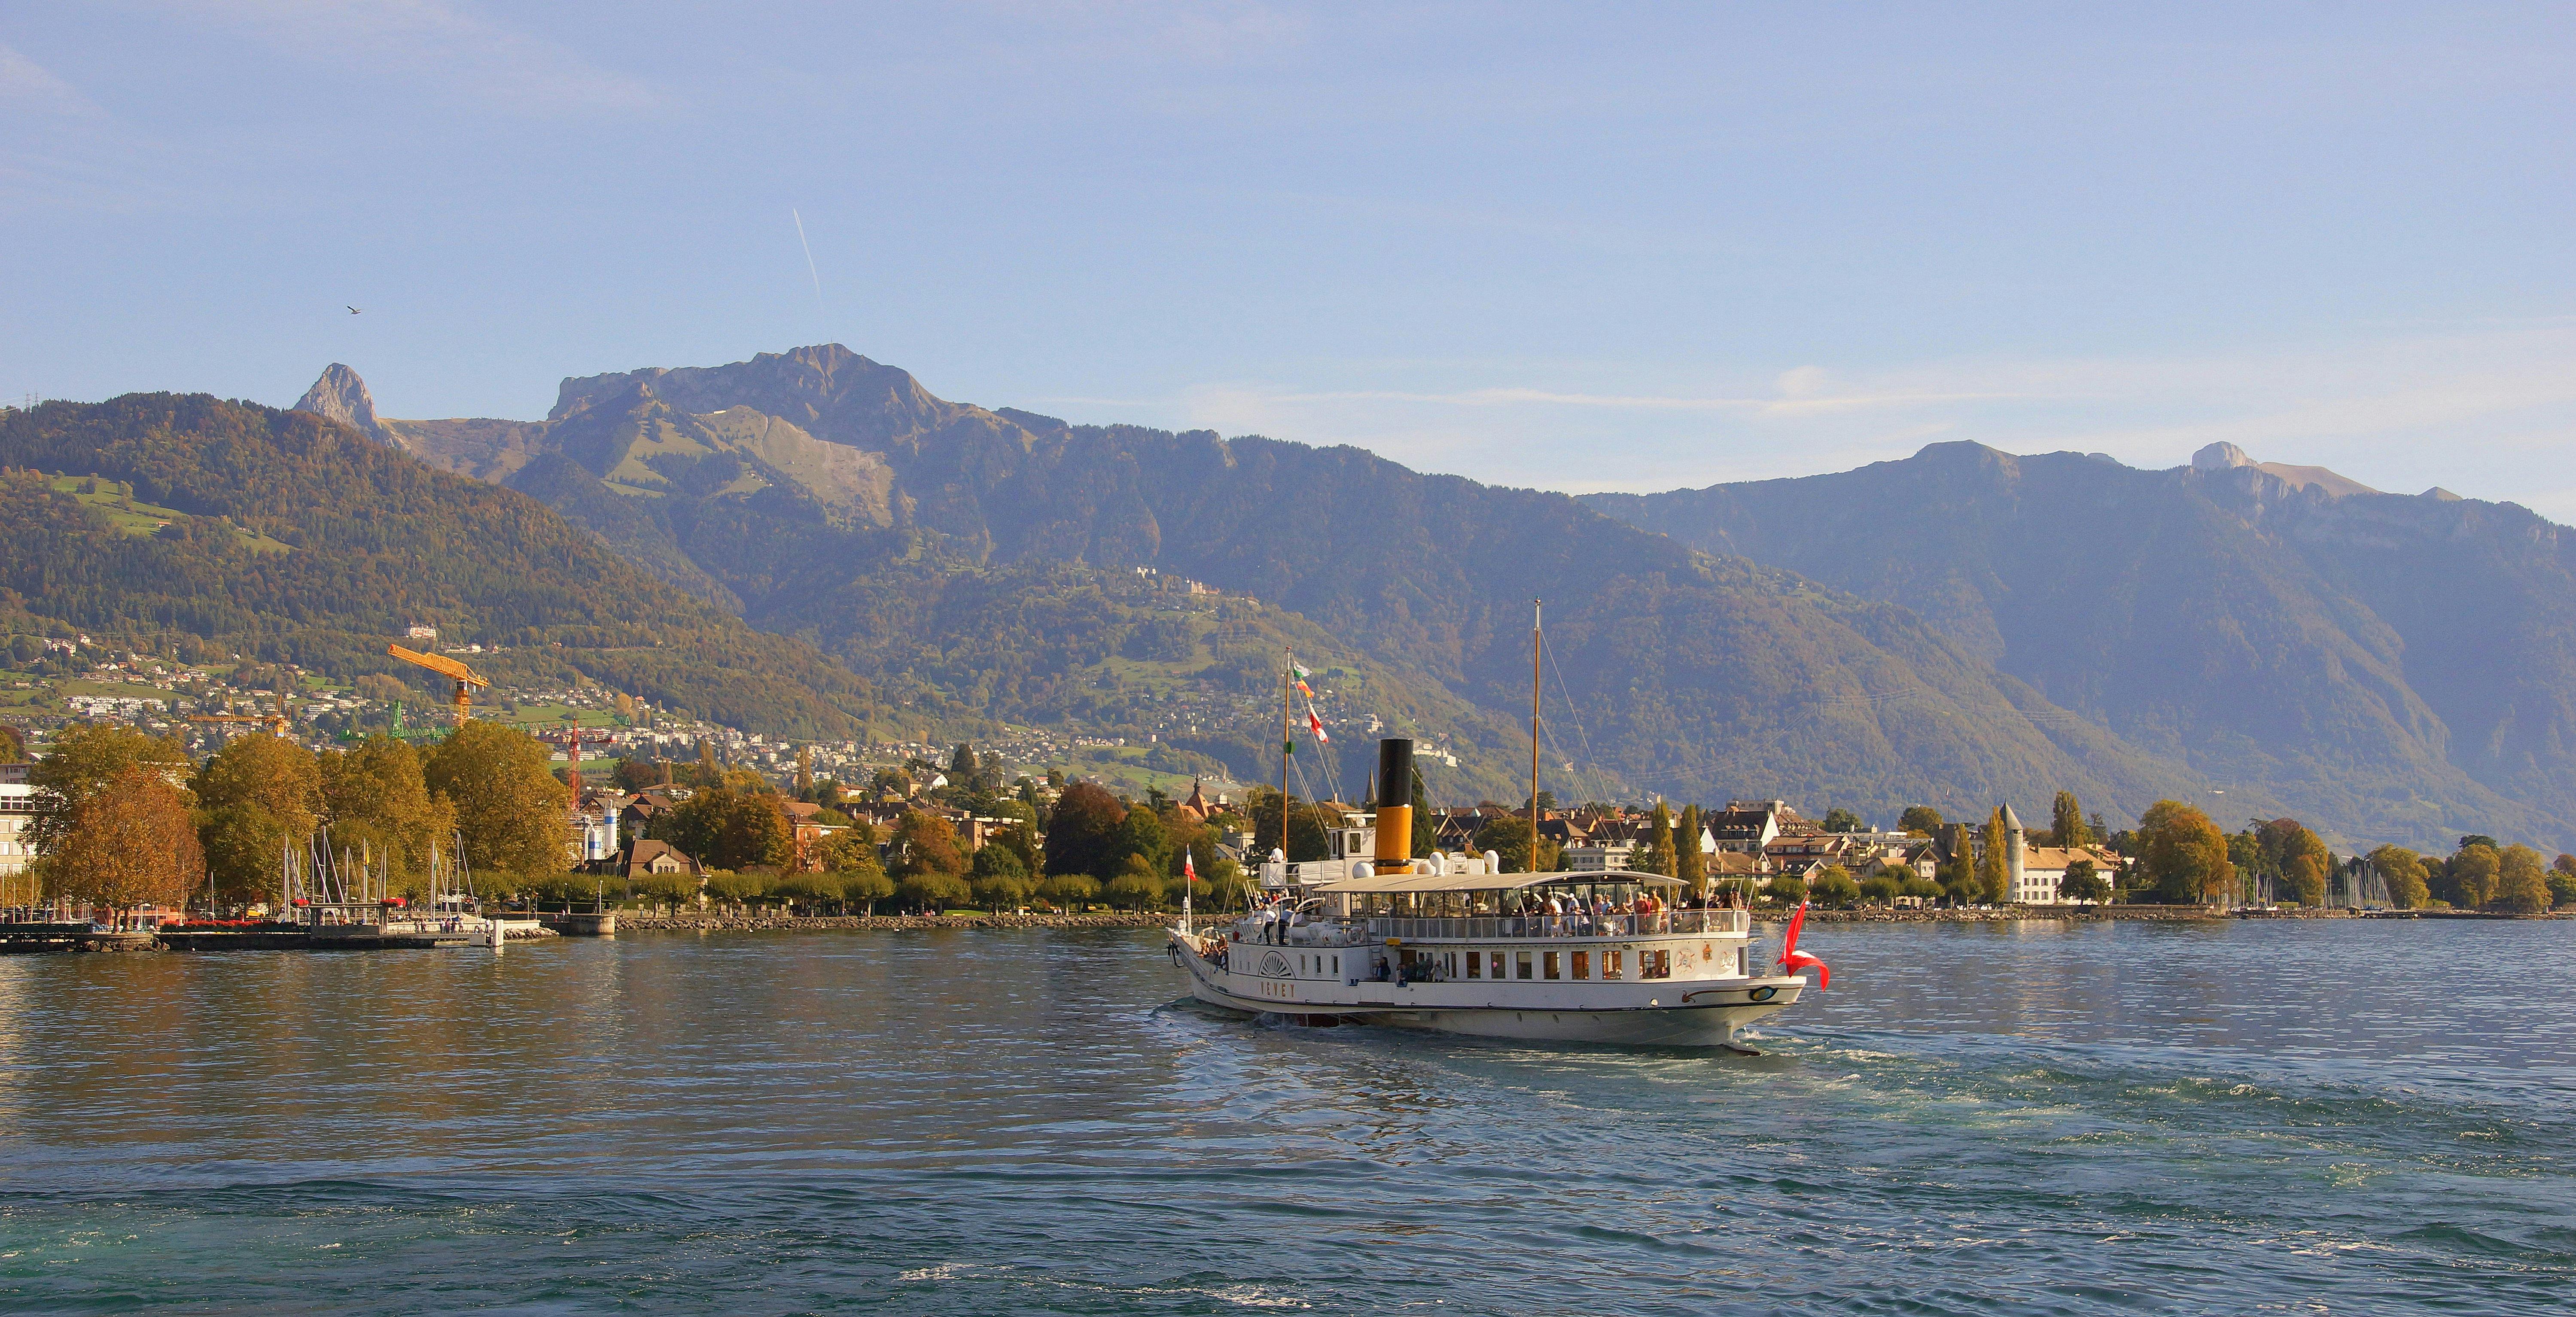 Riviera cruise of Lake Geneva from Montreux